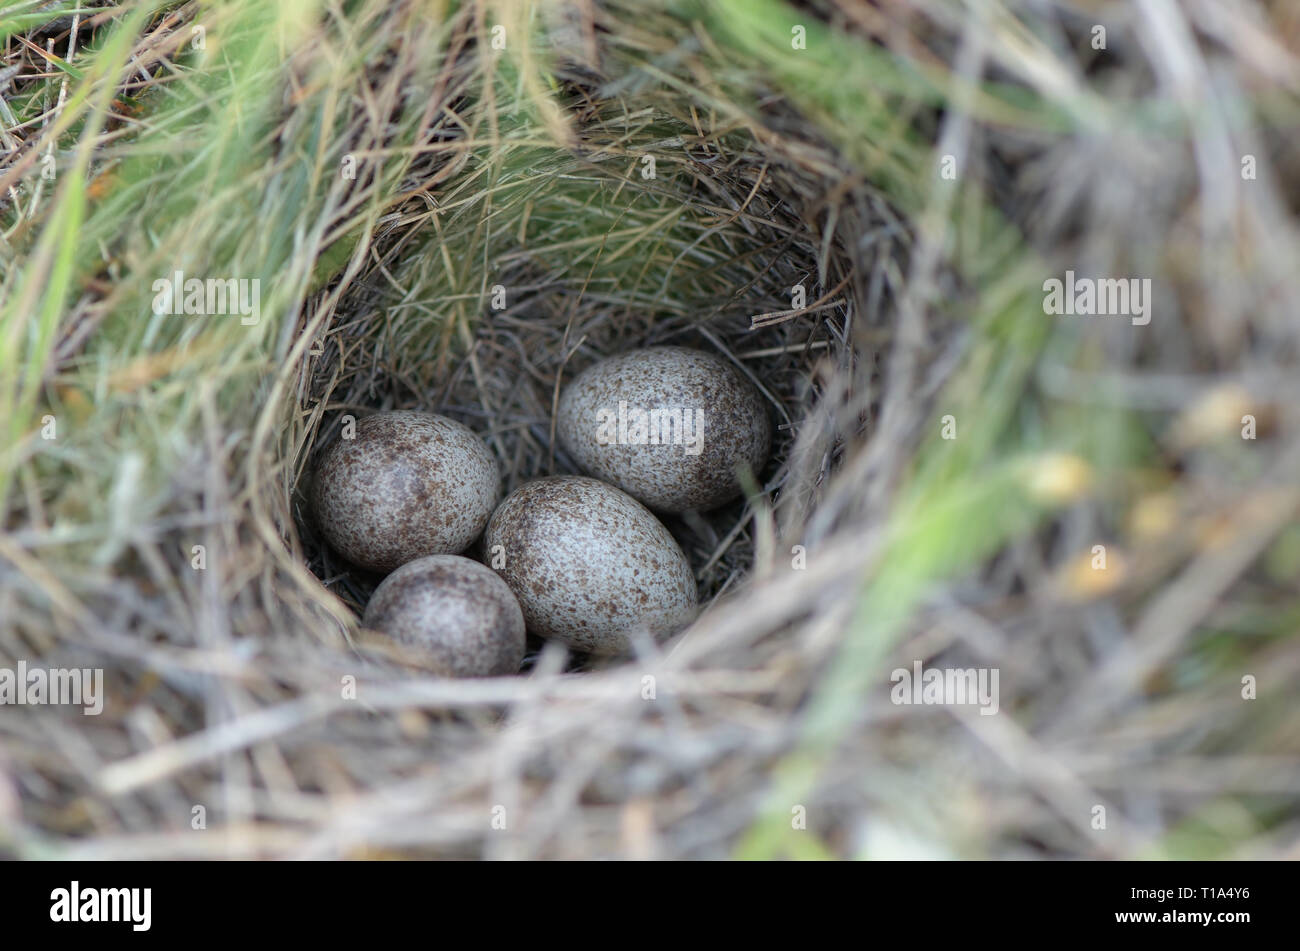 Four bird eggs in a nest in the grass Stock Photo